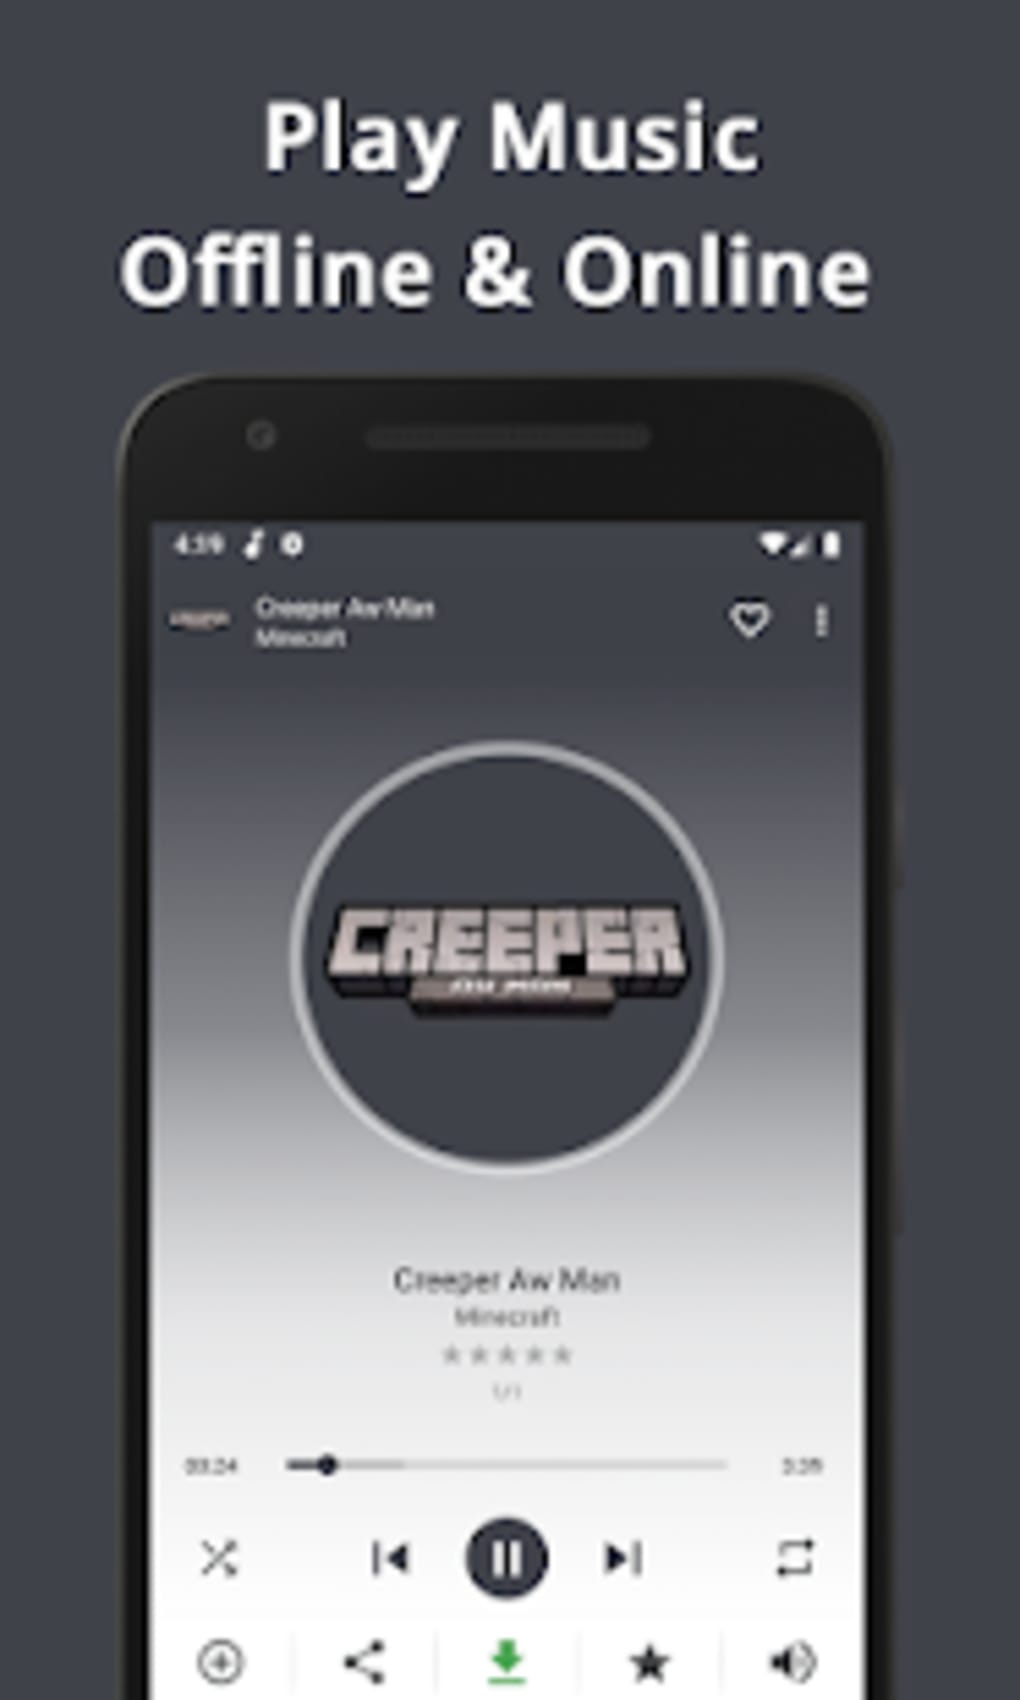 Creeper Aw Man Parody Song Of Minecraft Lyrics For Android Download